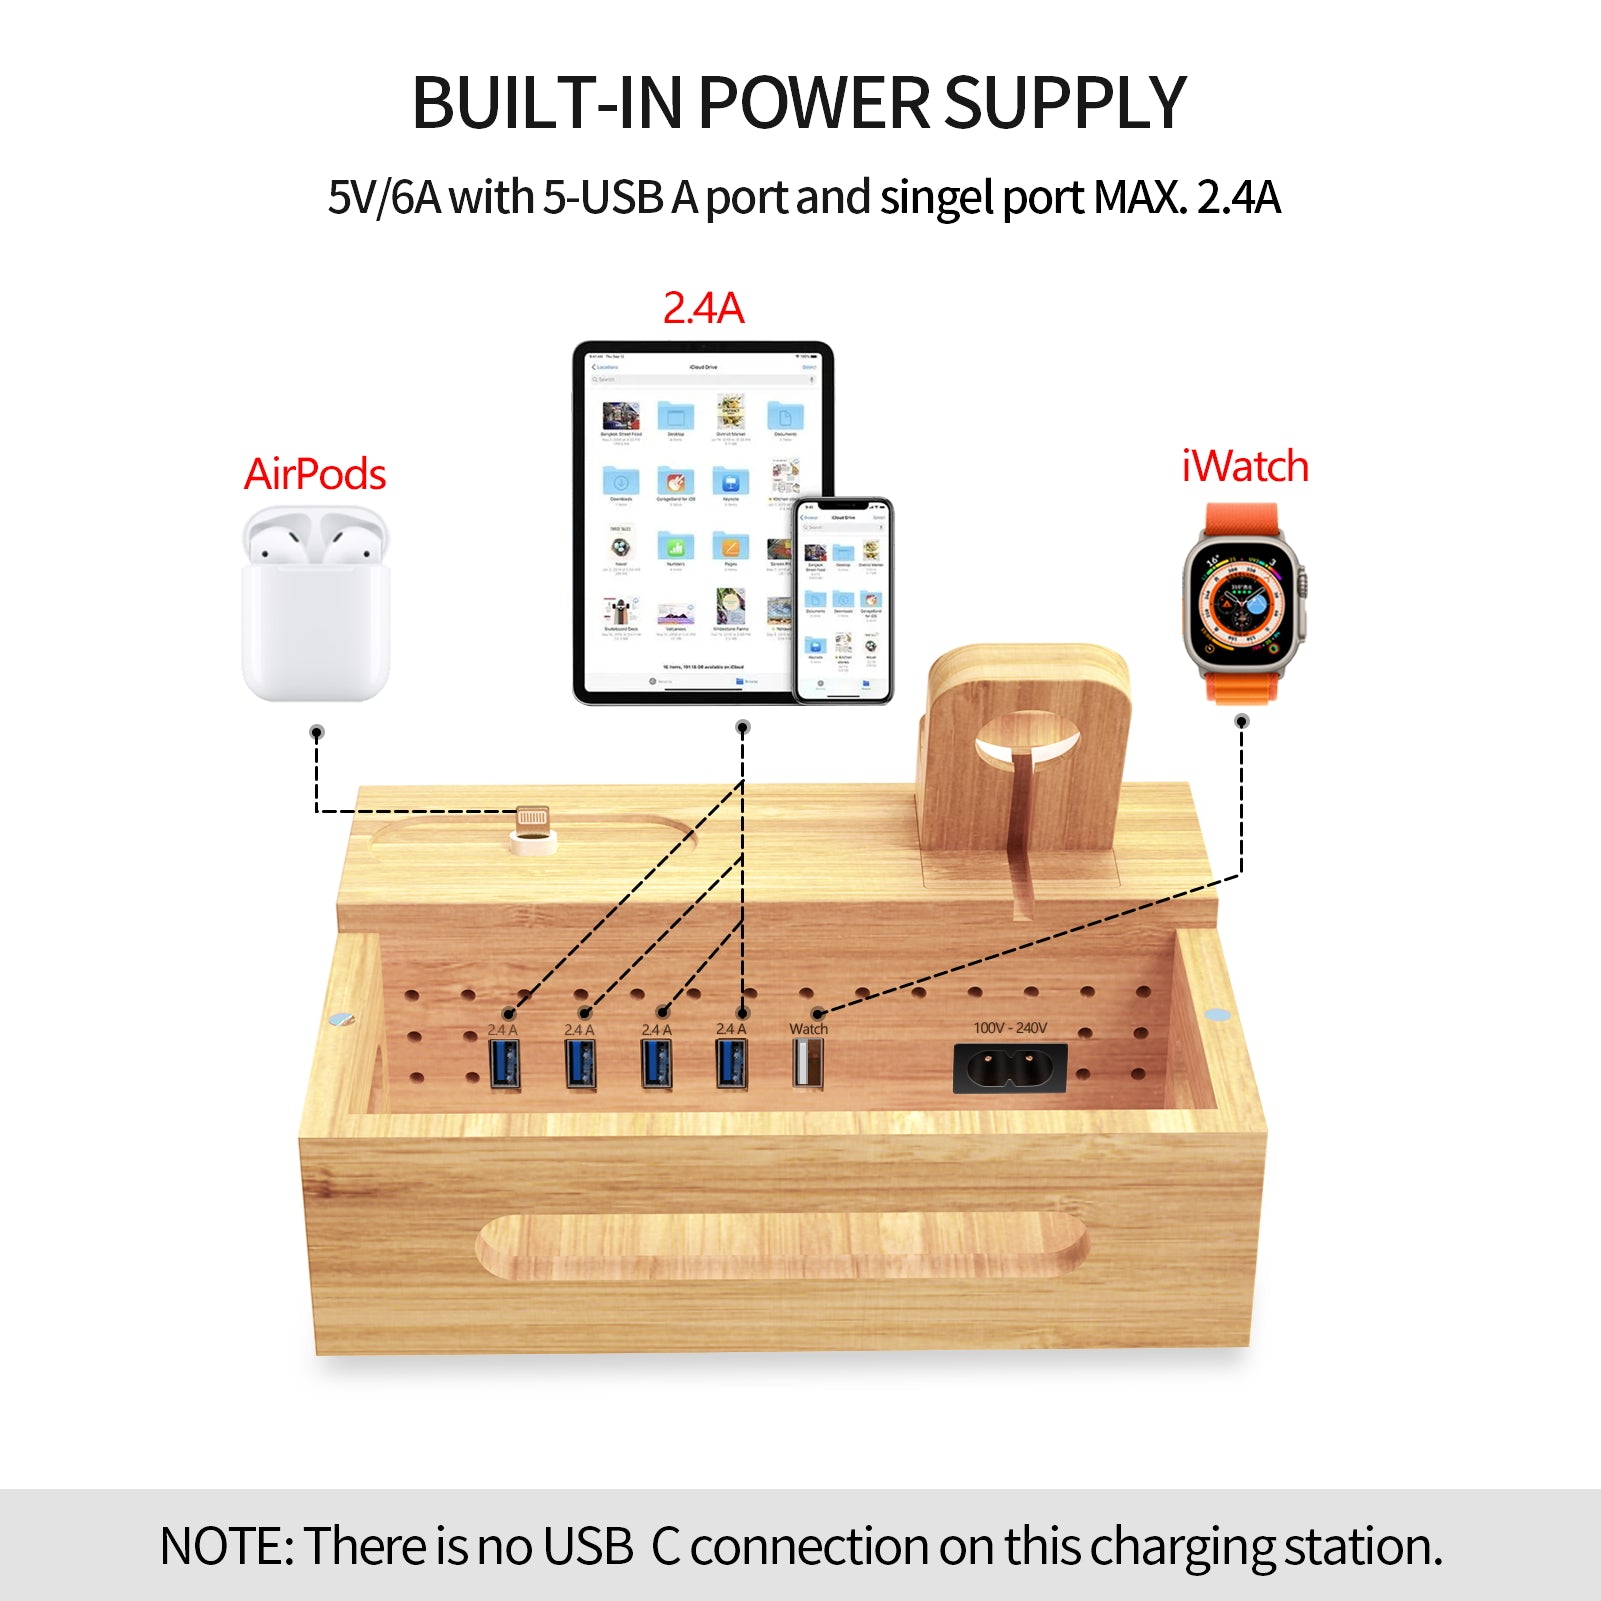 Bamboo Charging Station for Multi Device with 5 USB A Charger Port Sendowtek 6 in 1 Charging Stand for Phone Tablet Smart Watch Holder Earbud Dock Charger Organizer with Power Supply(no watch charger)